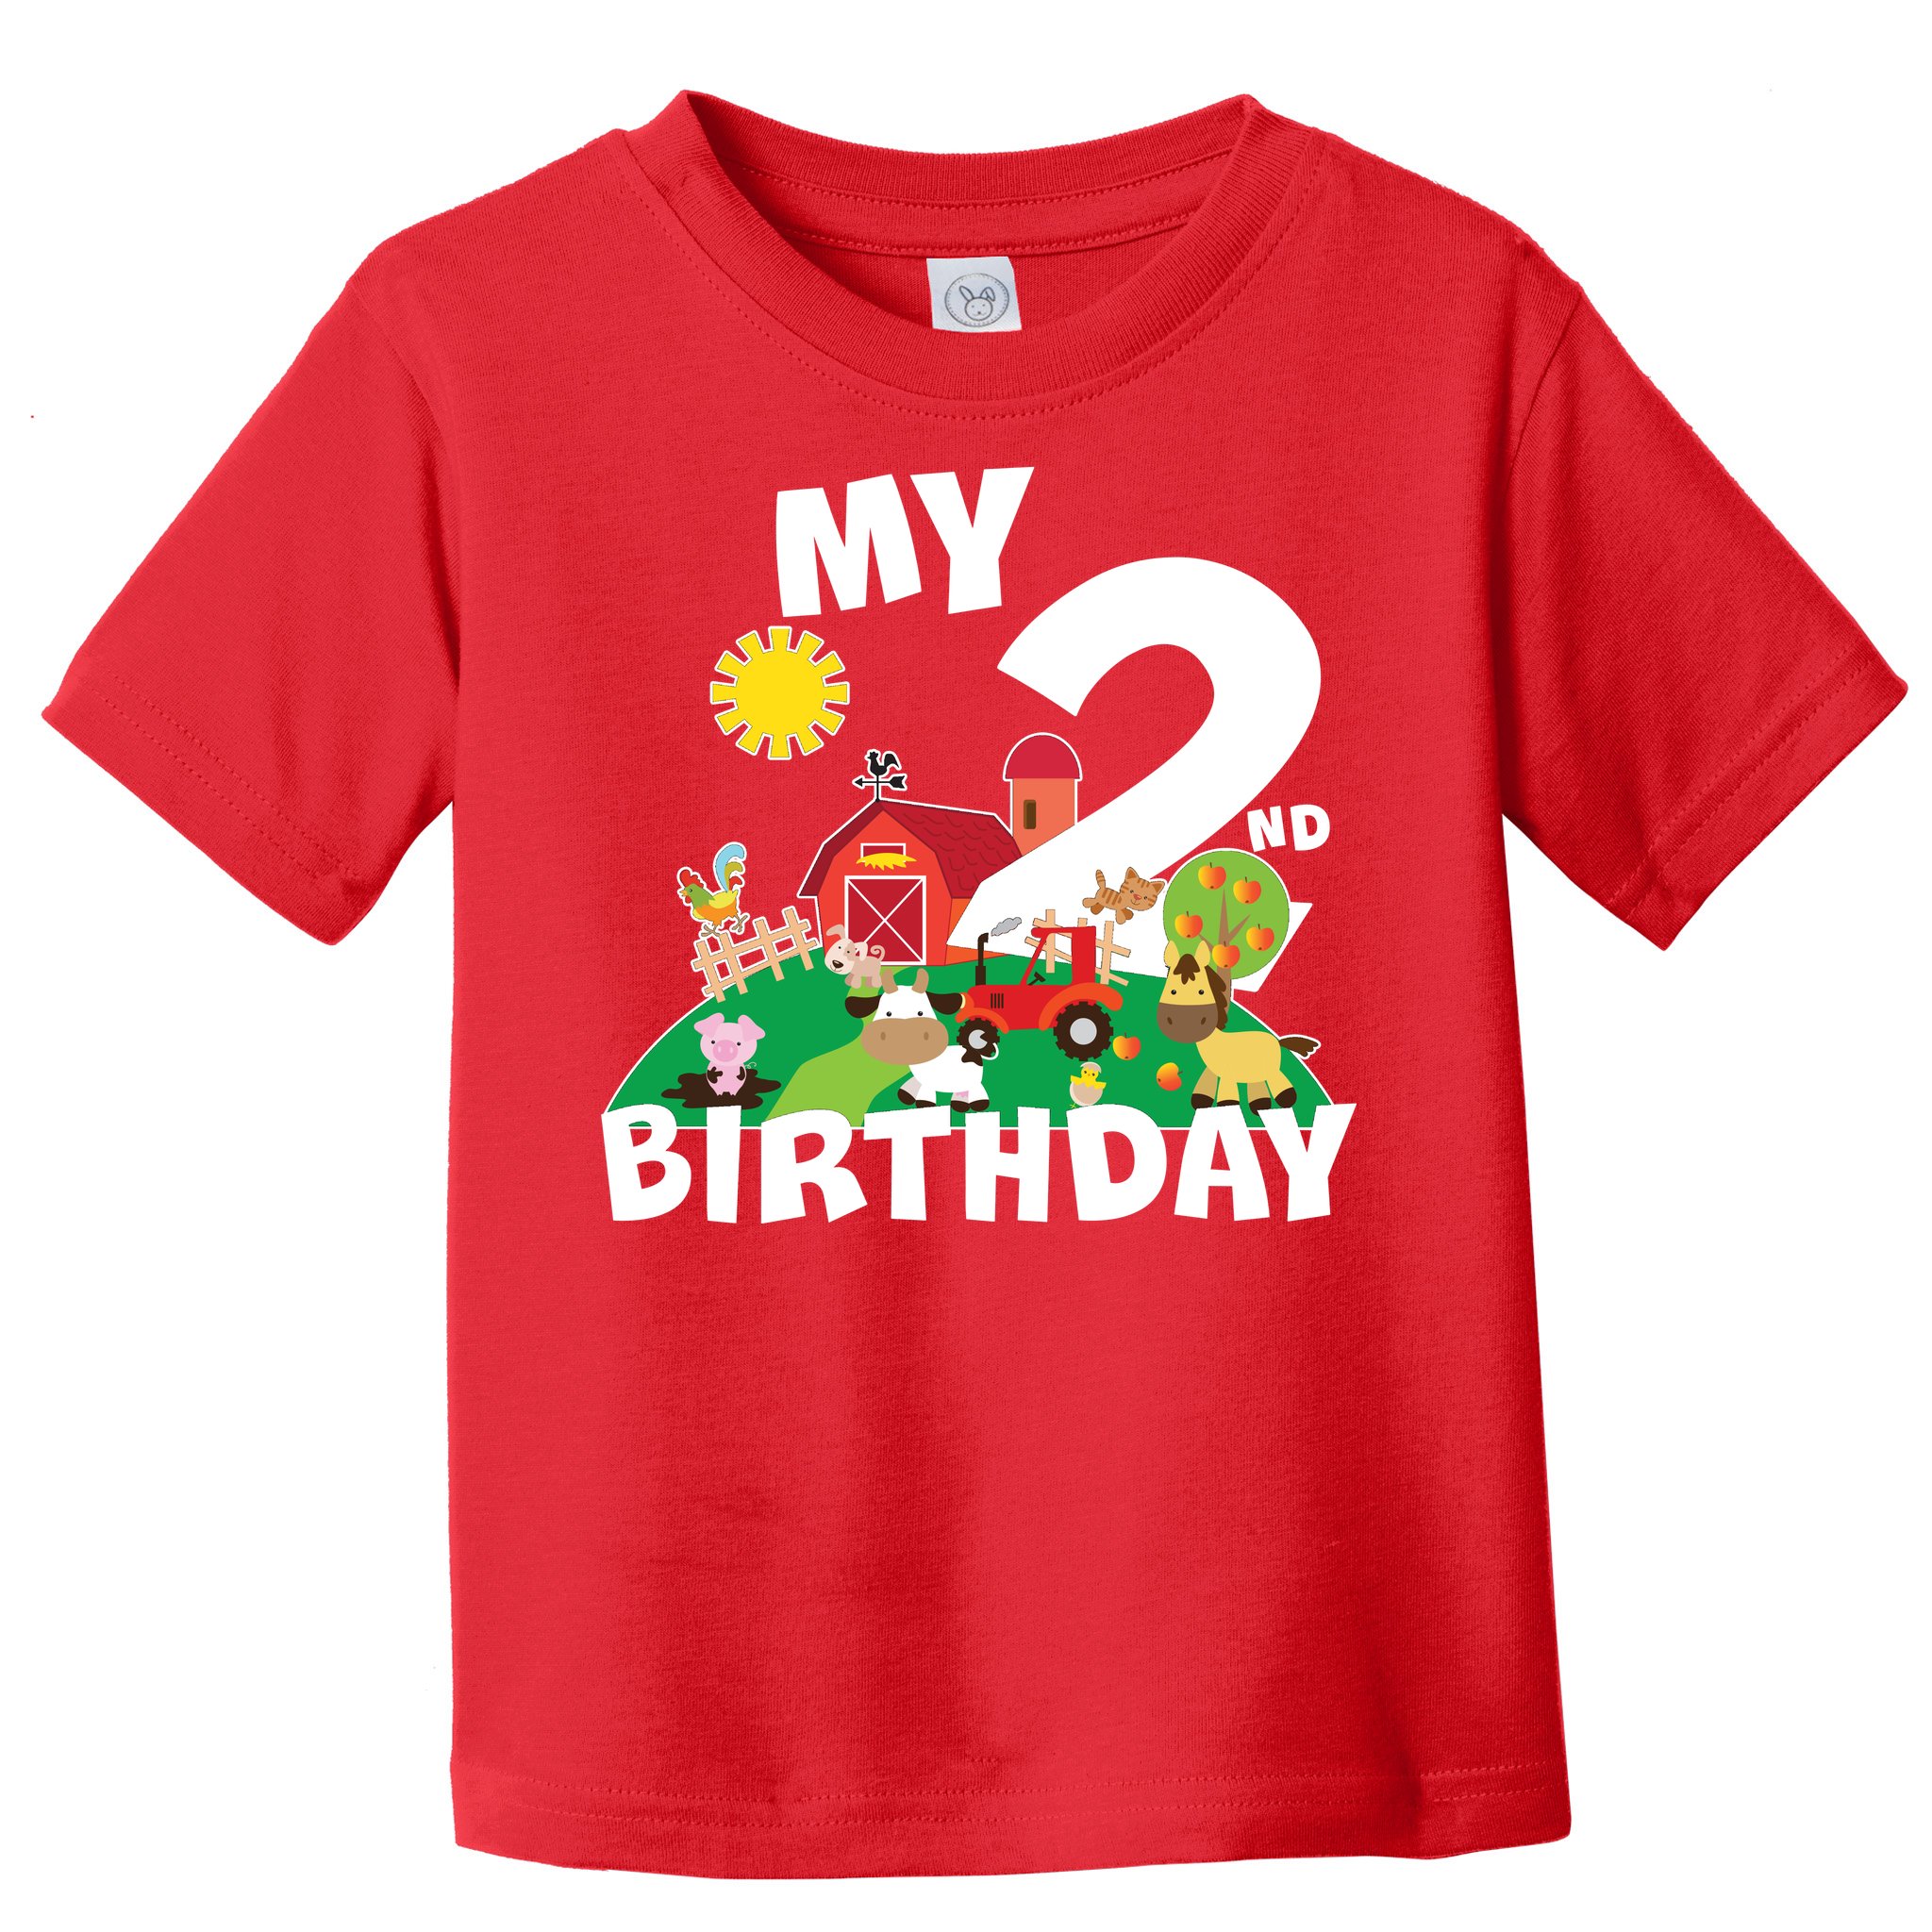 Your Birth Year T-Shirt Personalized Vintage Available in Sizes S-4XL 100% Cotton 6.0 oz Available in Over 30 Colors